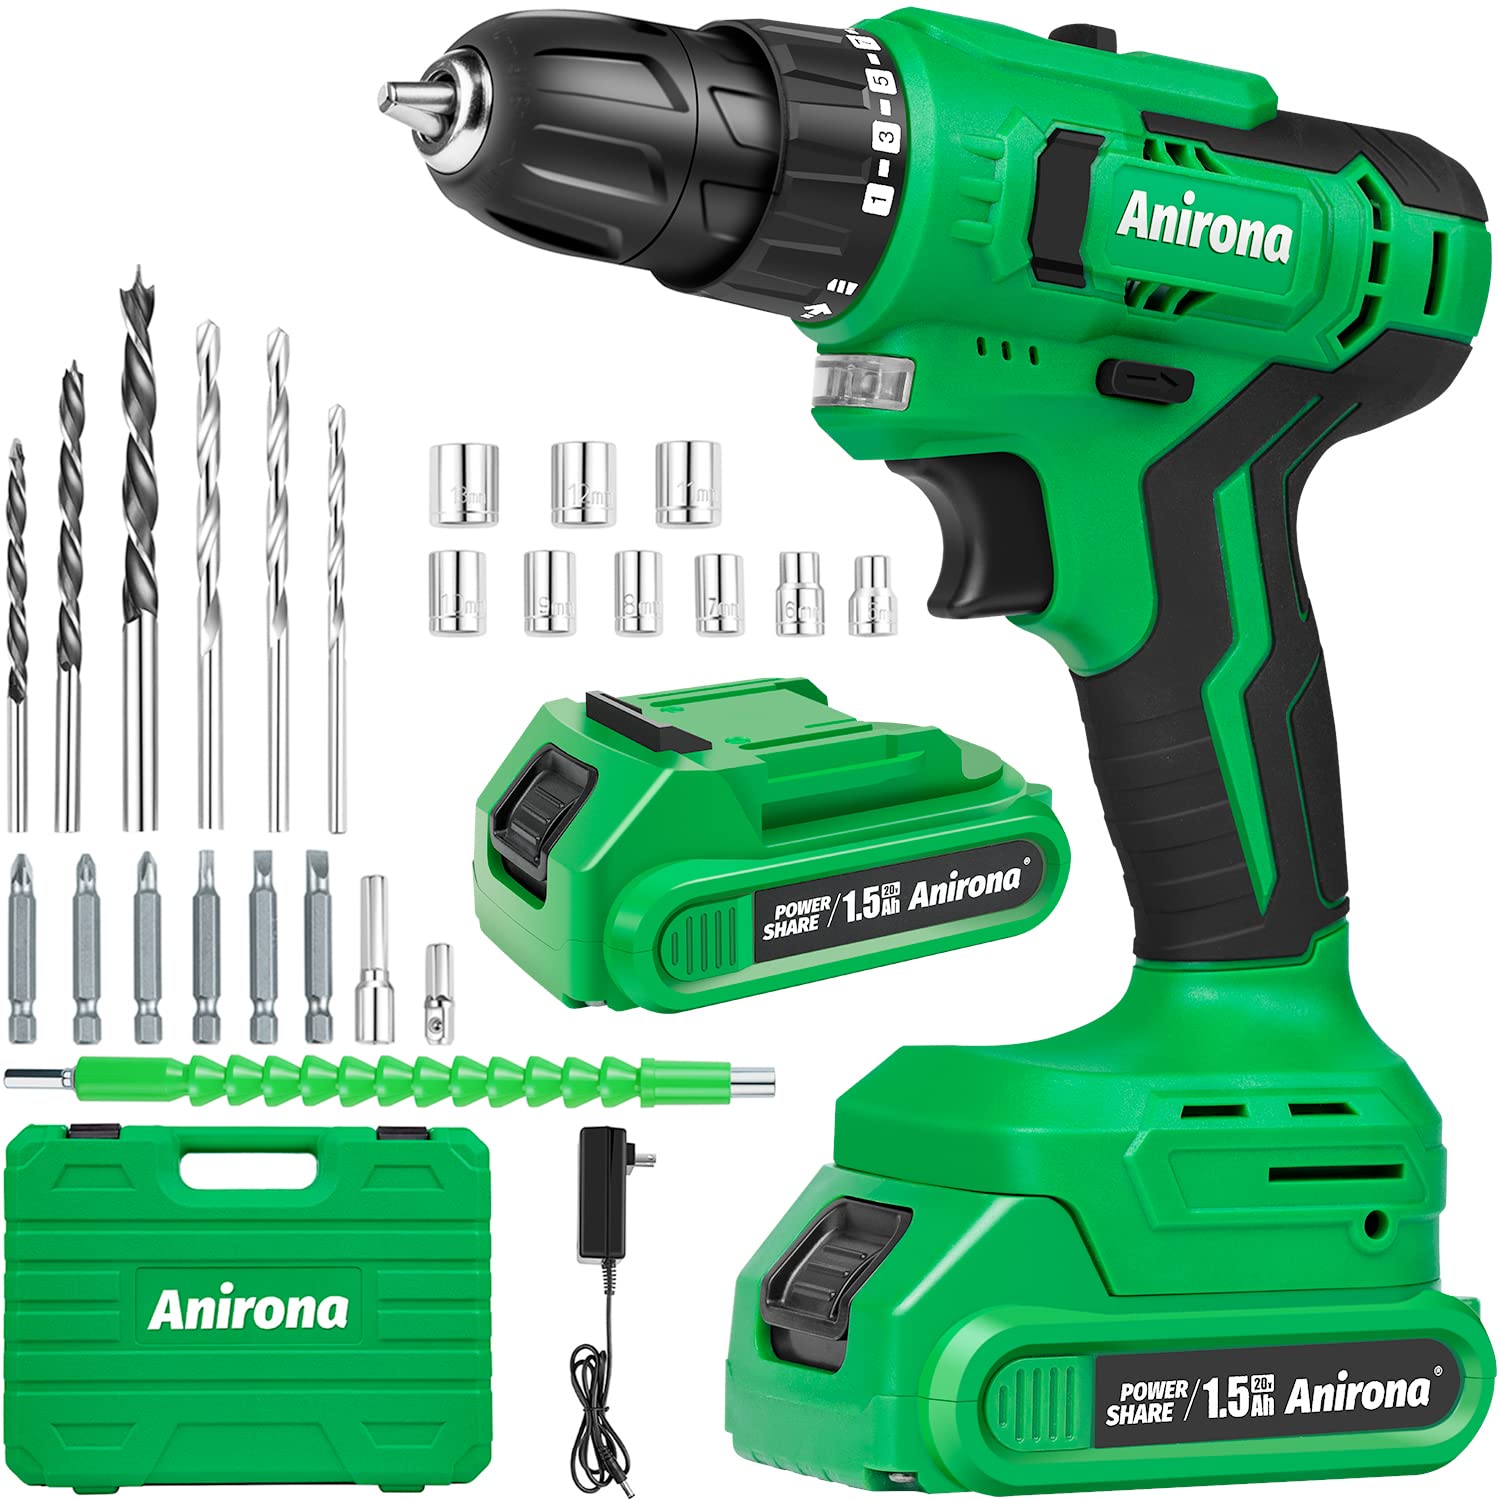 Anirona Cordless Drill Set, 20V Cordless Drill with Battery and Charger, 350 In-lb Torque, 3/8″Keyless Chuck, 2 Variable Speed, Fast Charger, 30pcs Bits Accessories with Case